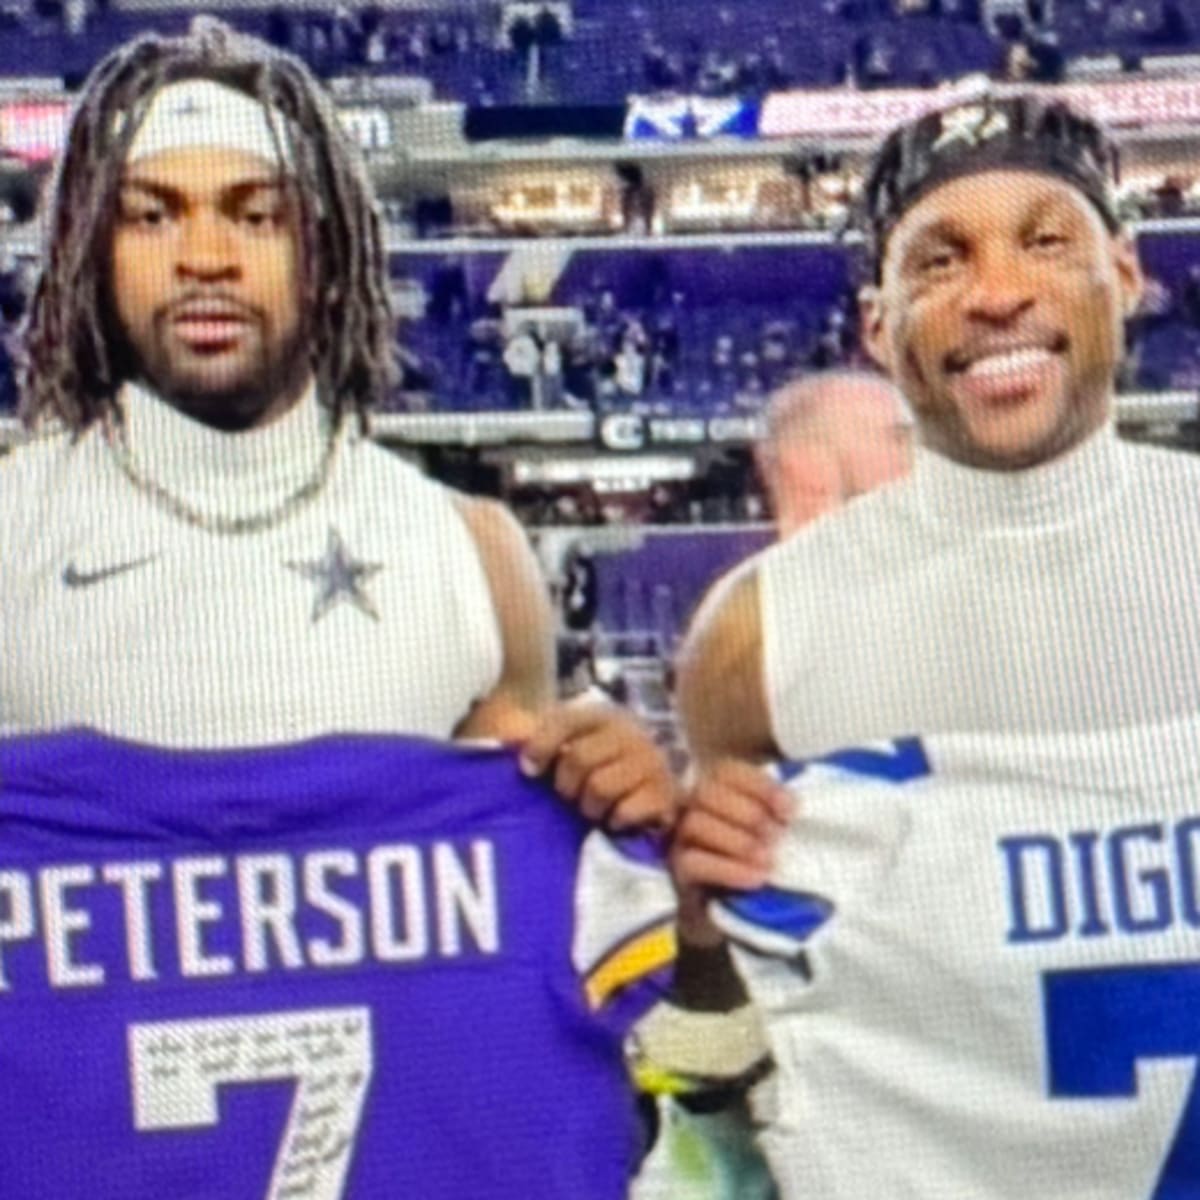 Trevon Diggs calls Patrick Peterson the GOAT 🐐 during postgame jersey swap  #shorts 